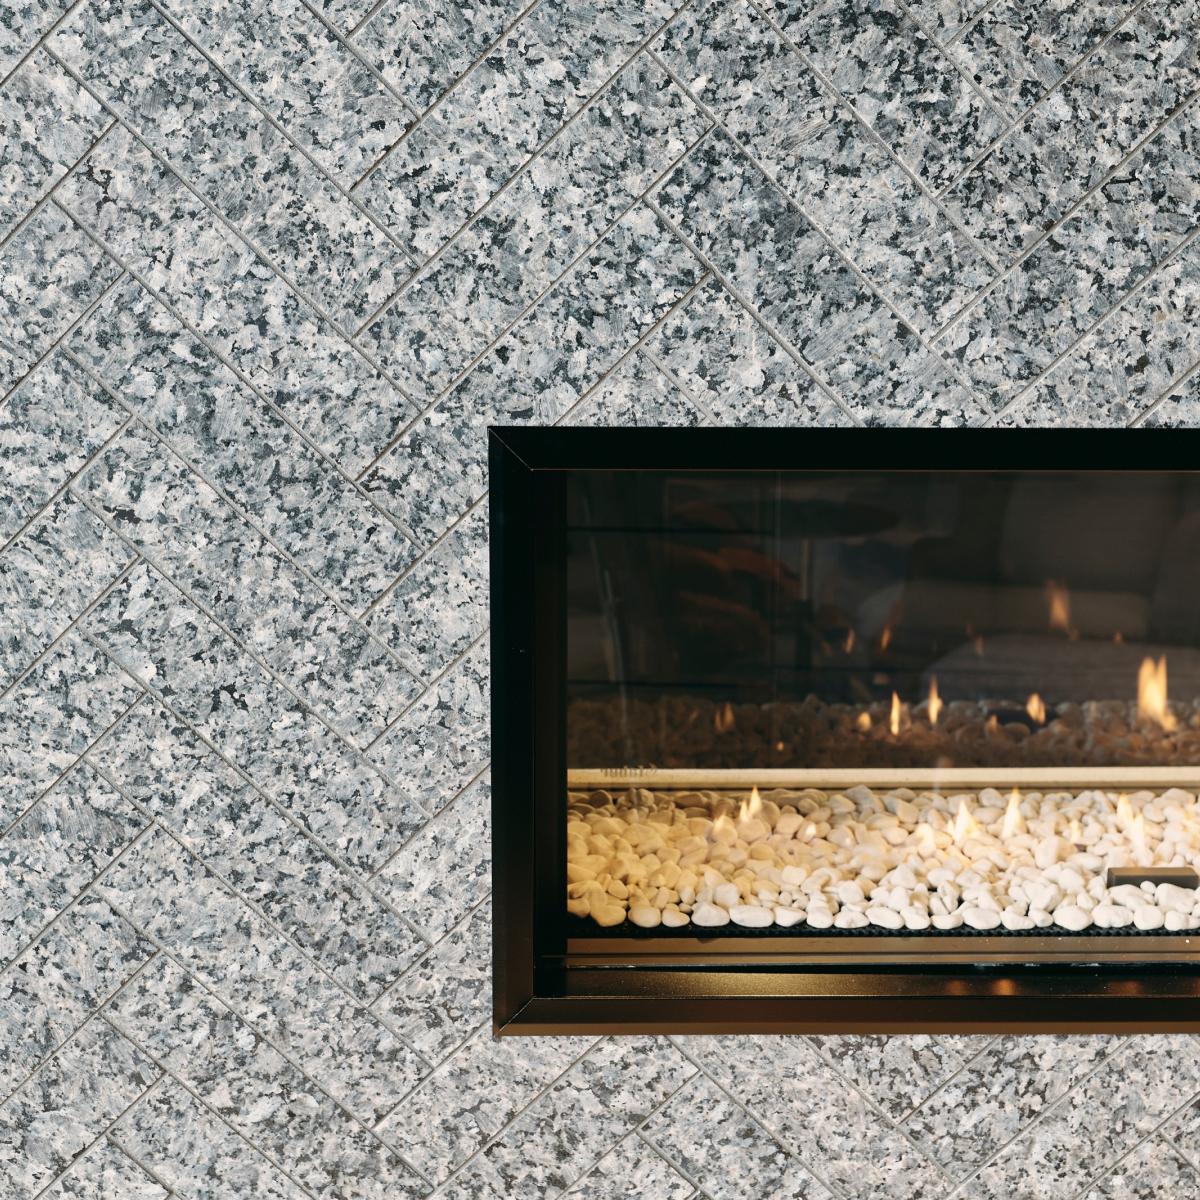 LUNDHS® REAL STONE – Royal® tile used for fireplace  –  photo courtesy of Morten Rakke for LUNDHS®